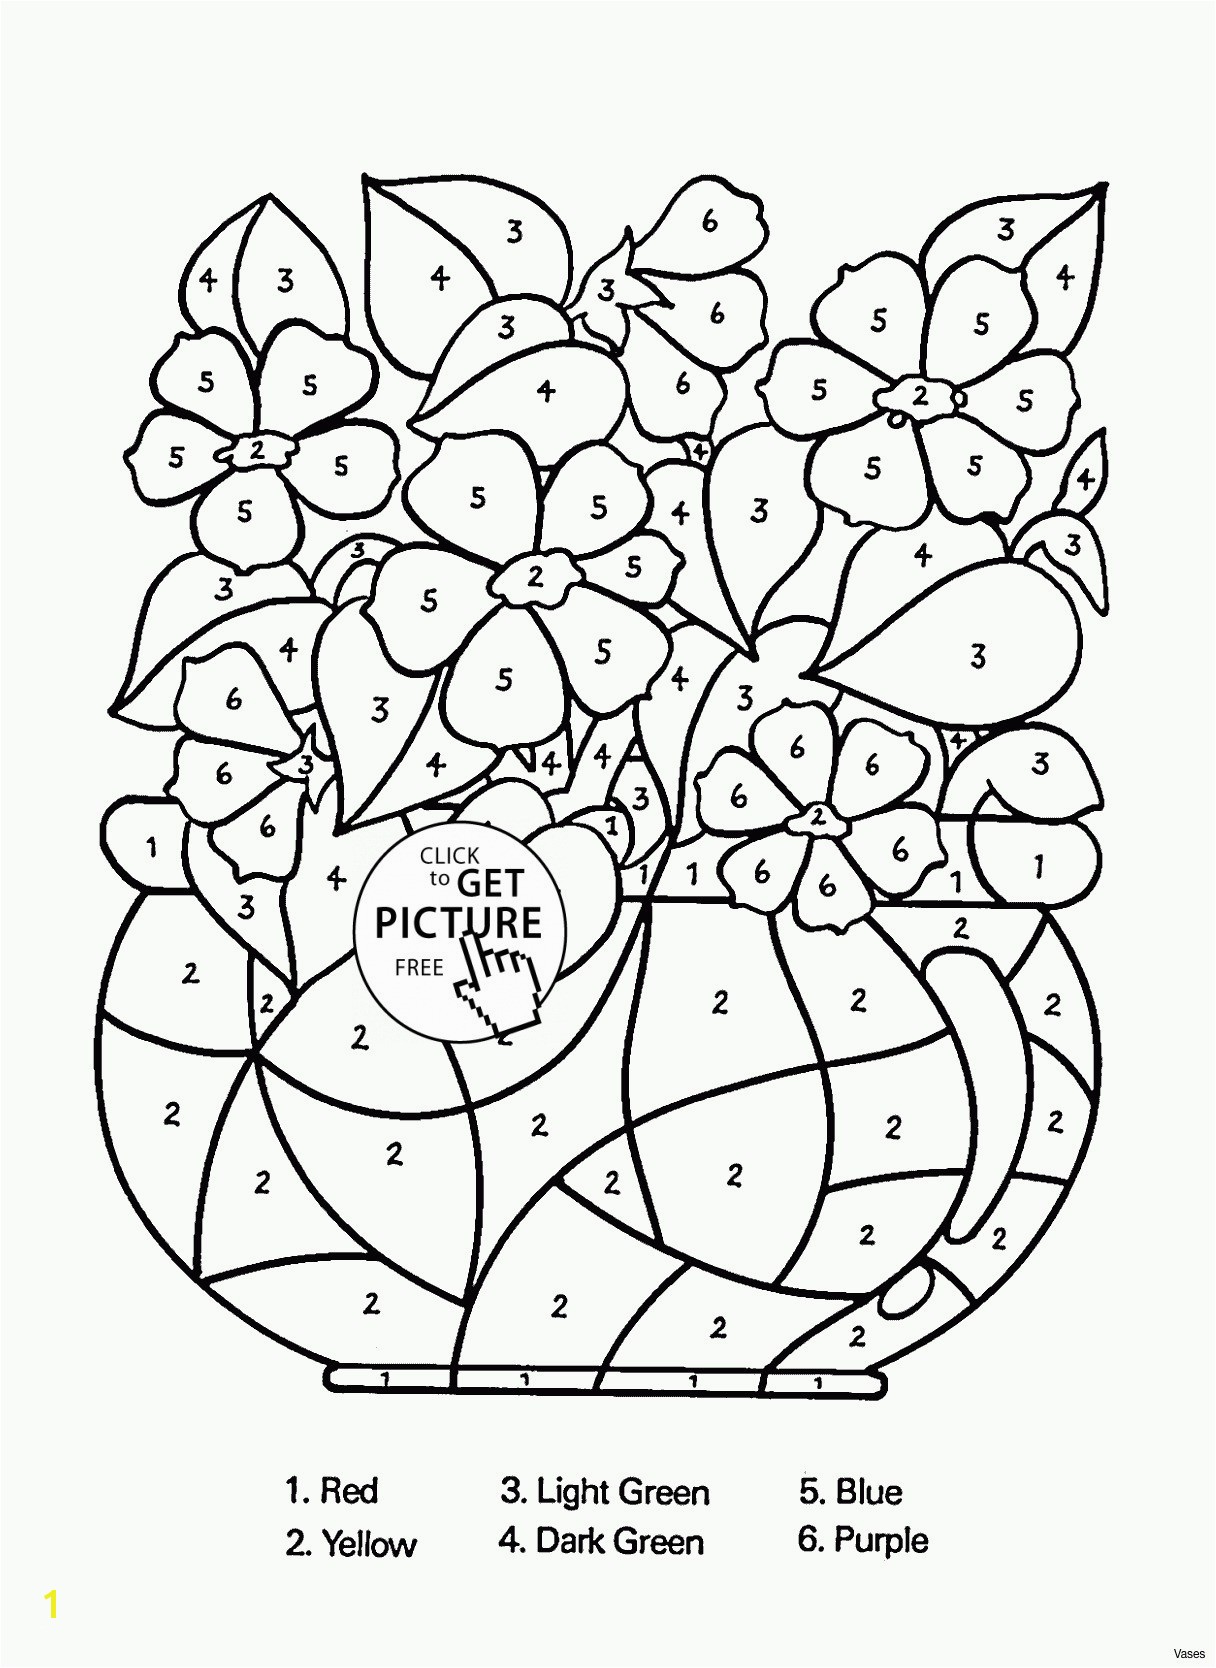 Pusheen Coloring Pages Best Pet Coloring Sheet Awesome Best Od Dog Coloring Pages Free Colouring